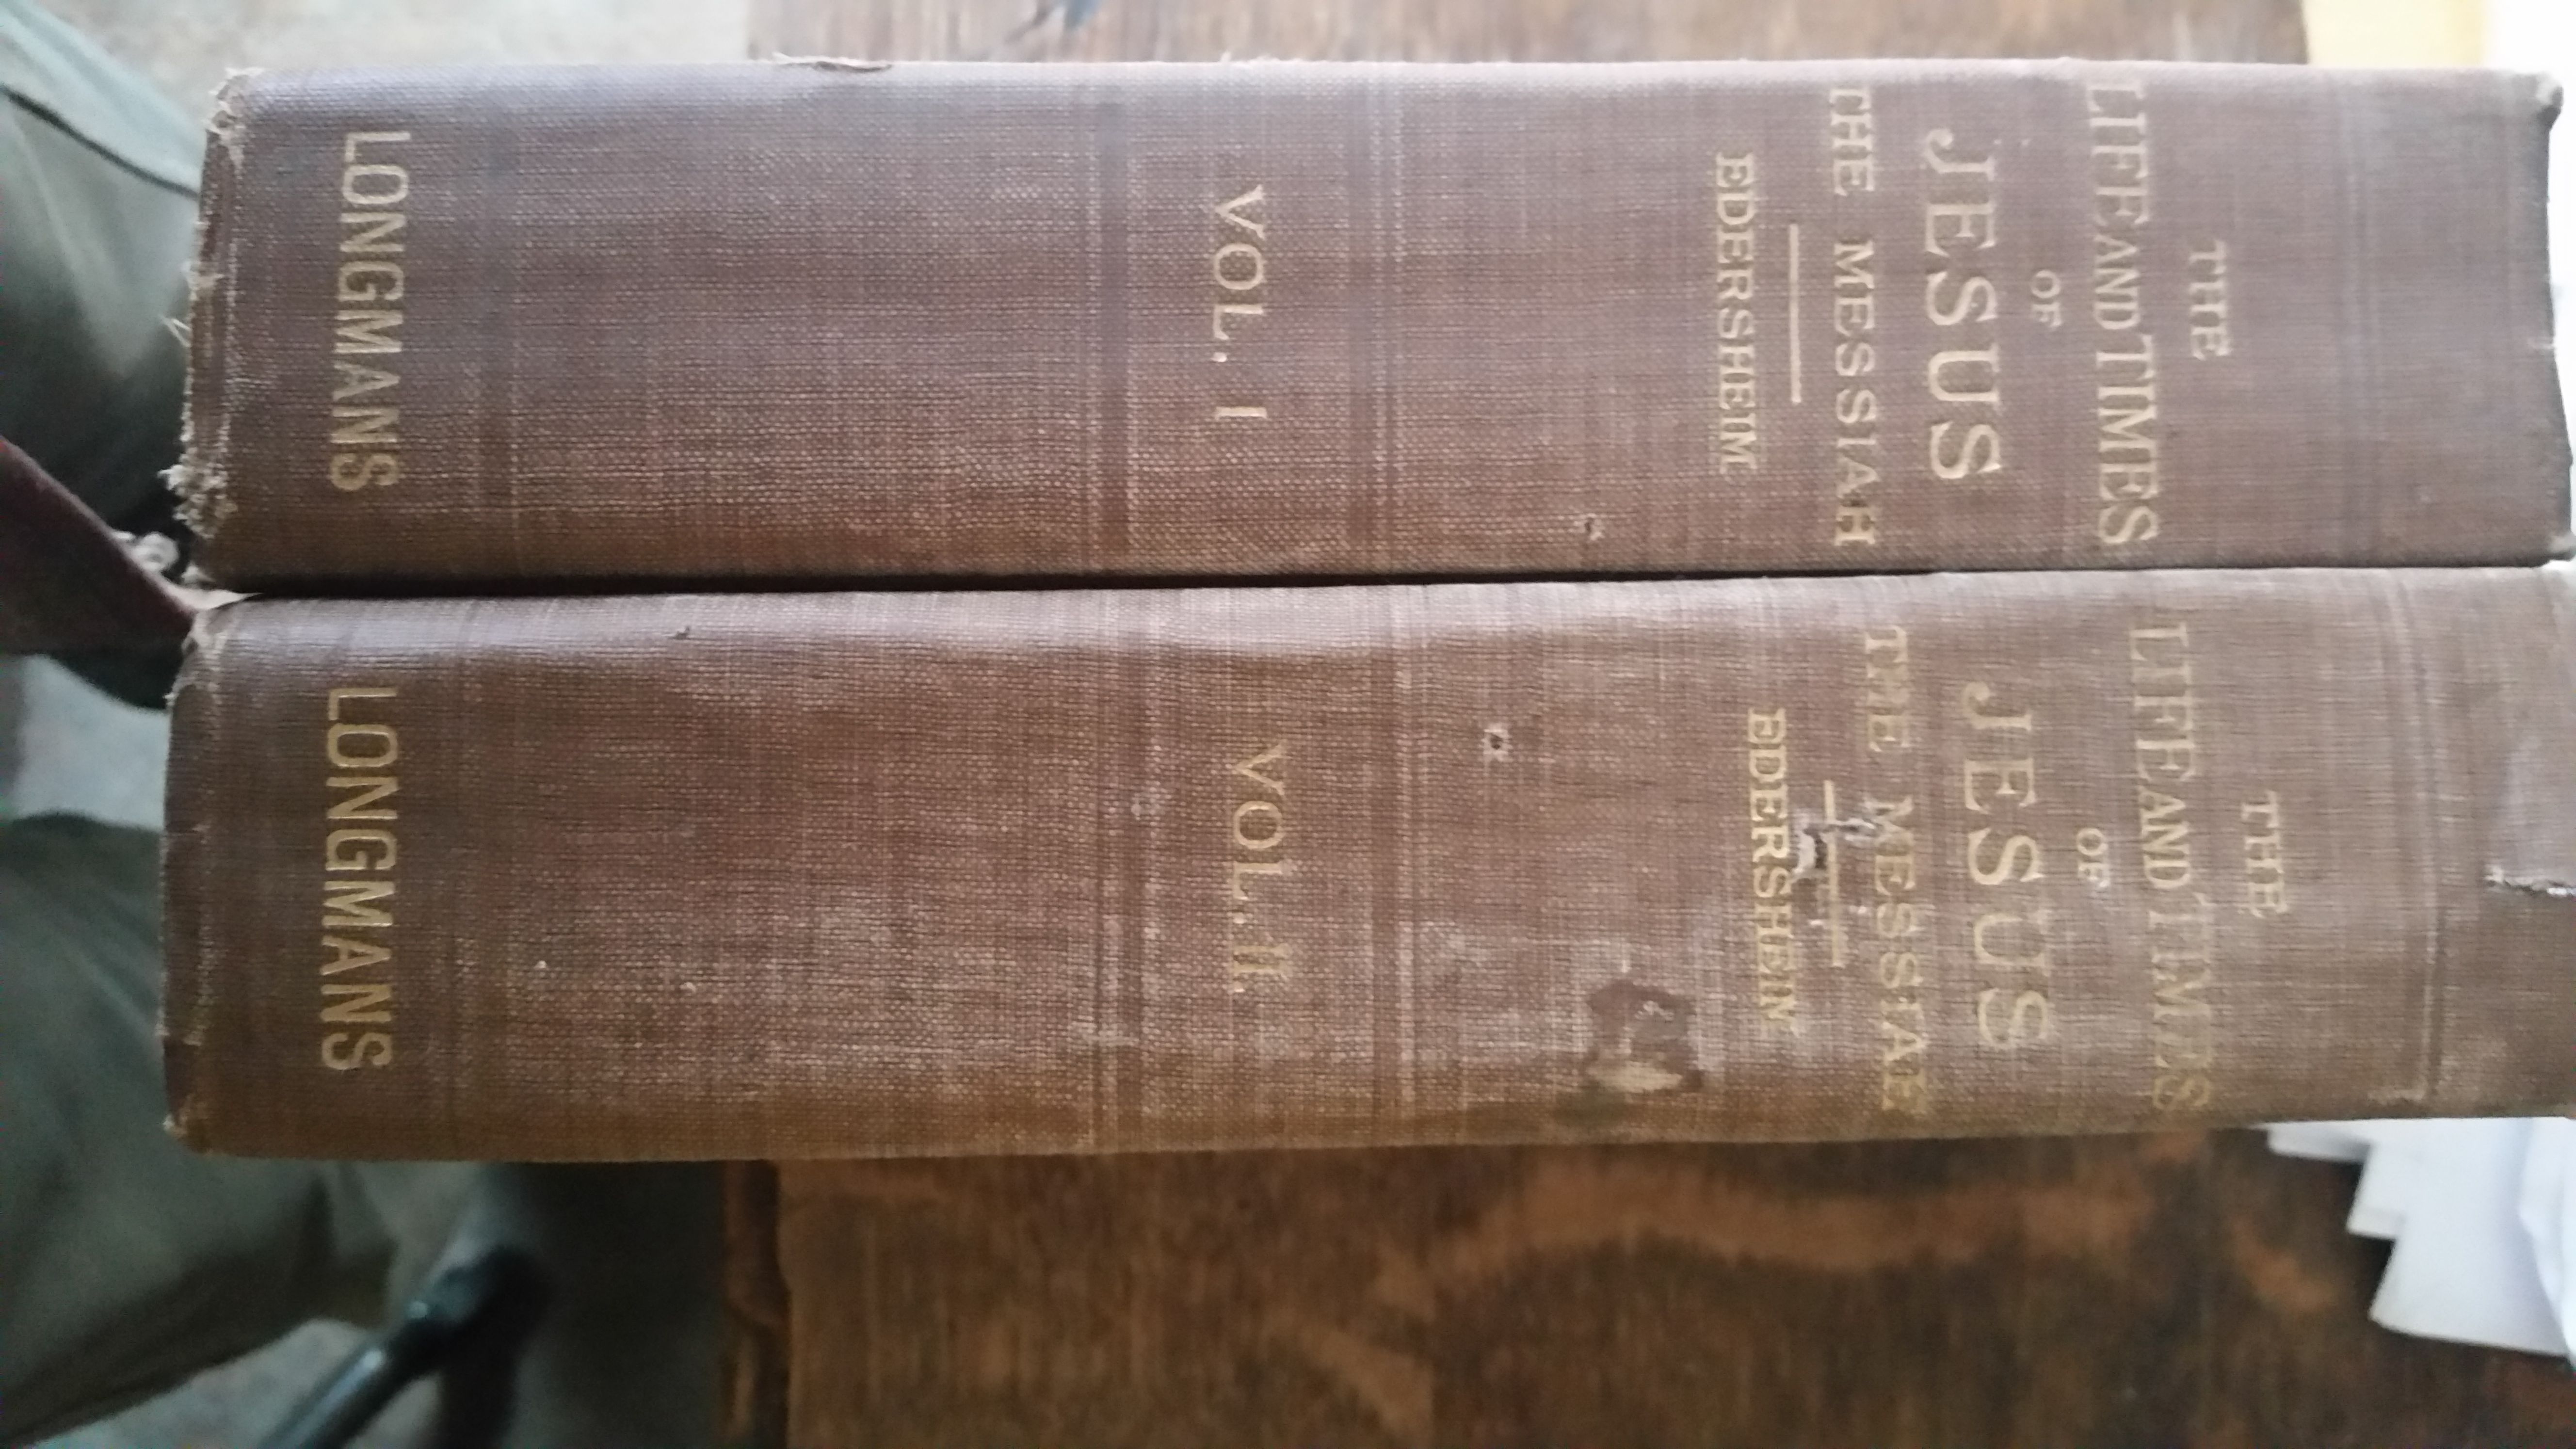 First edition of the 2 volume set quotation marks The Life and Times of Jesus the Messiah by Alfred Edersheim